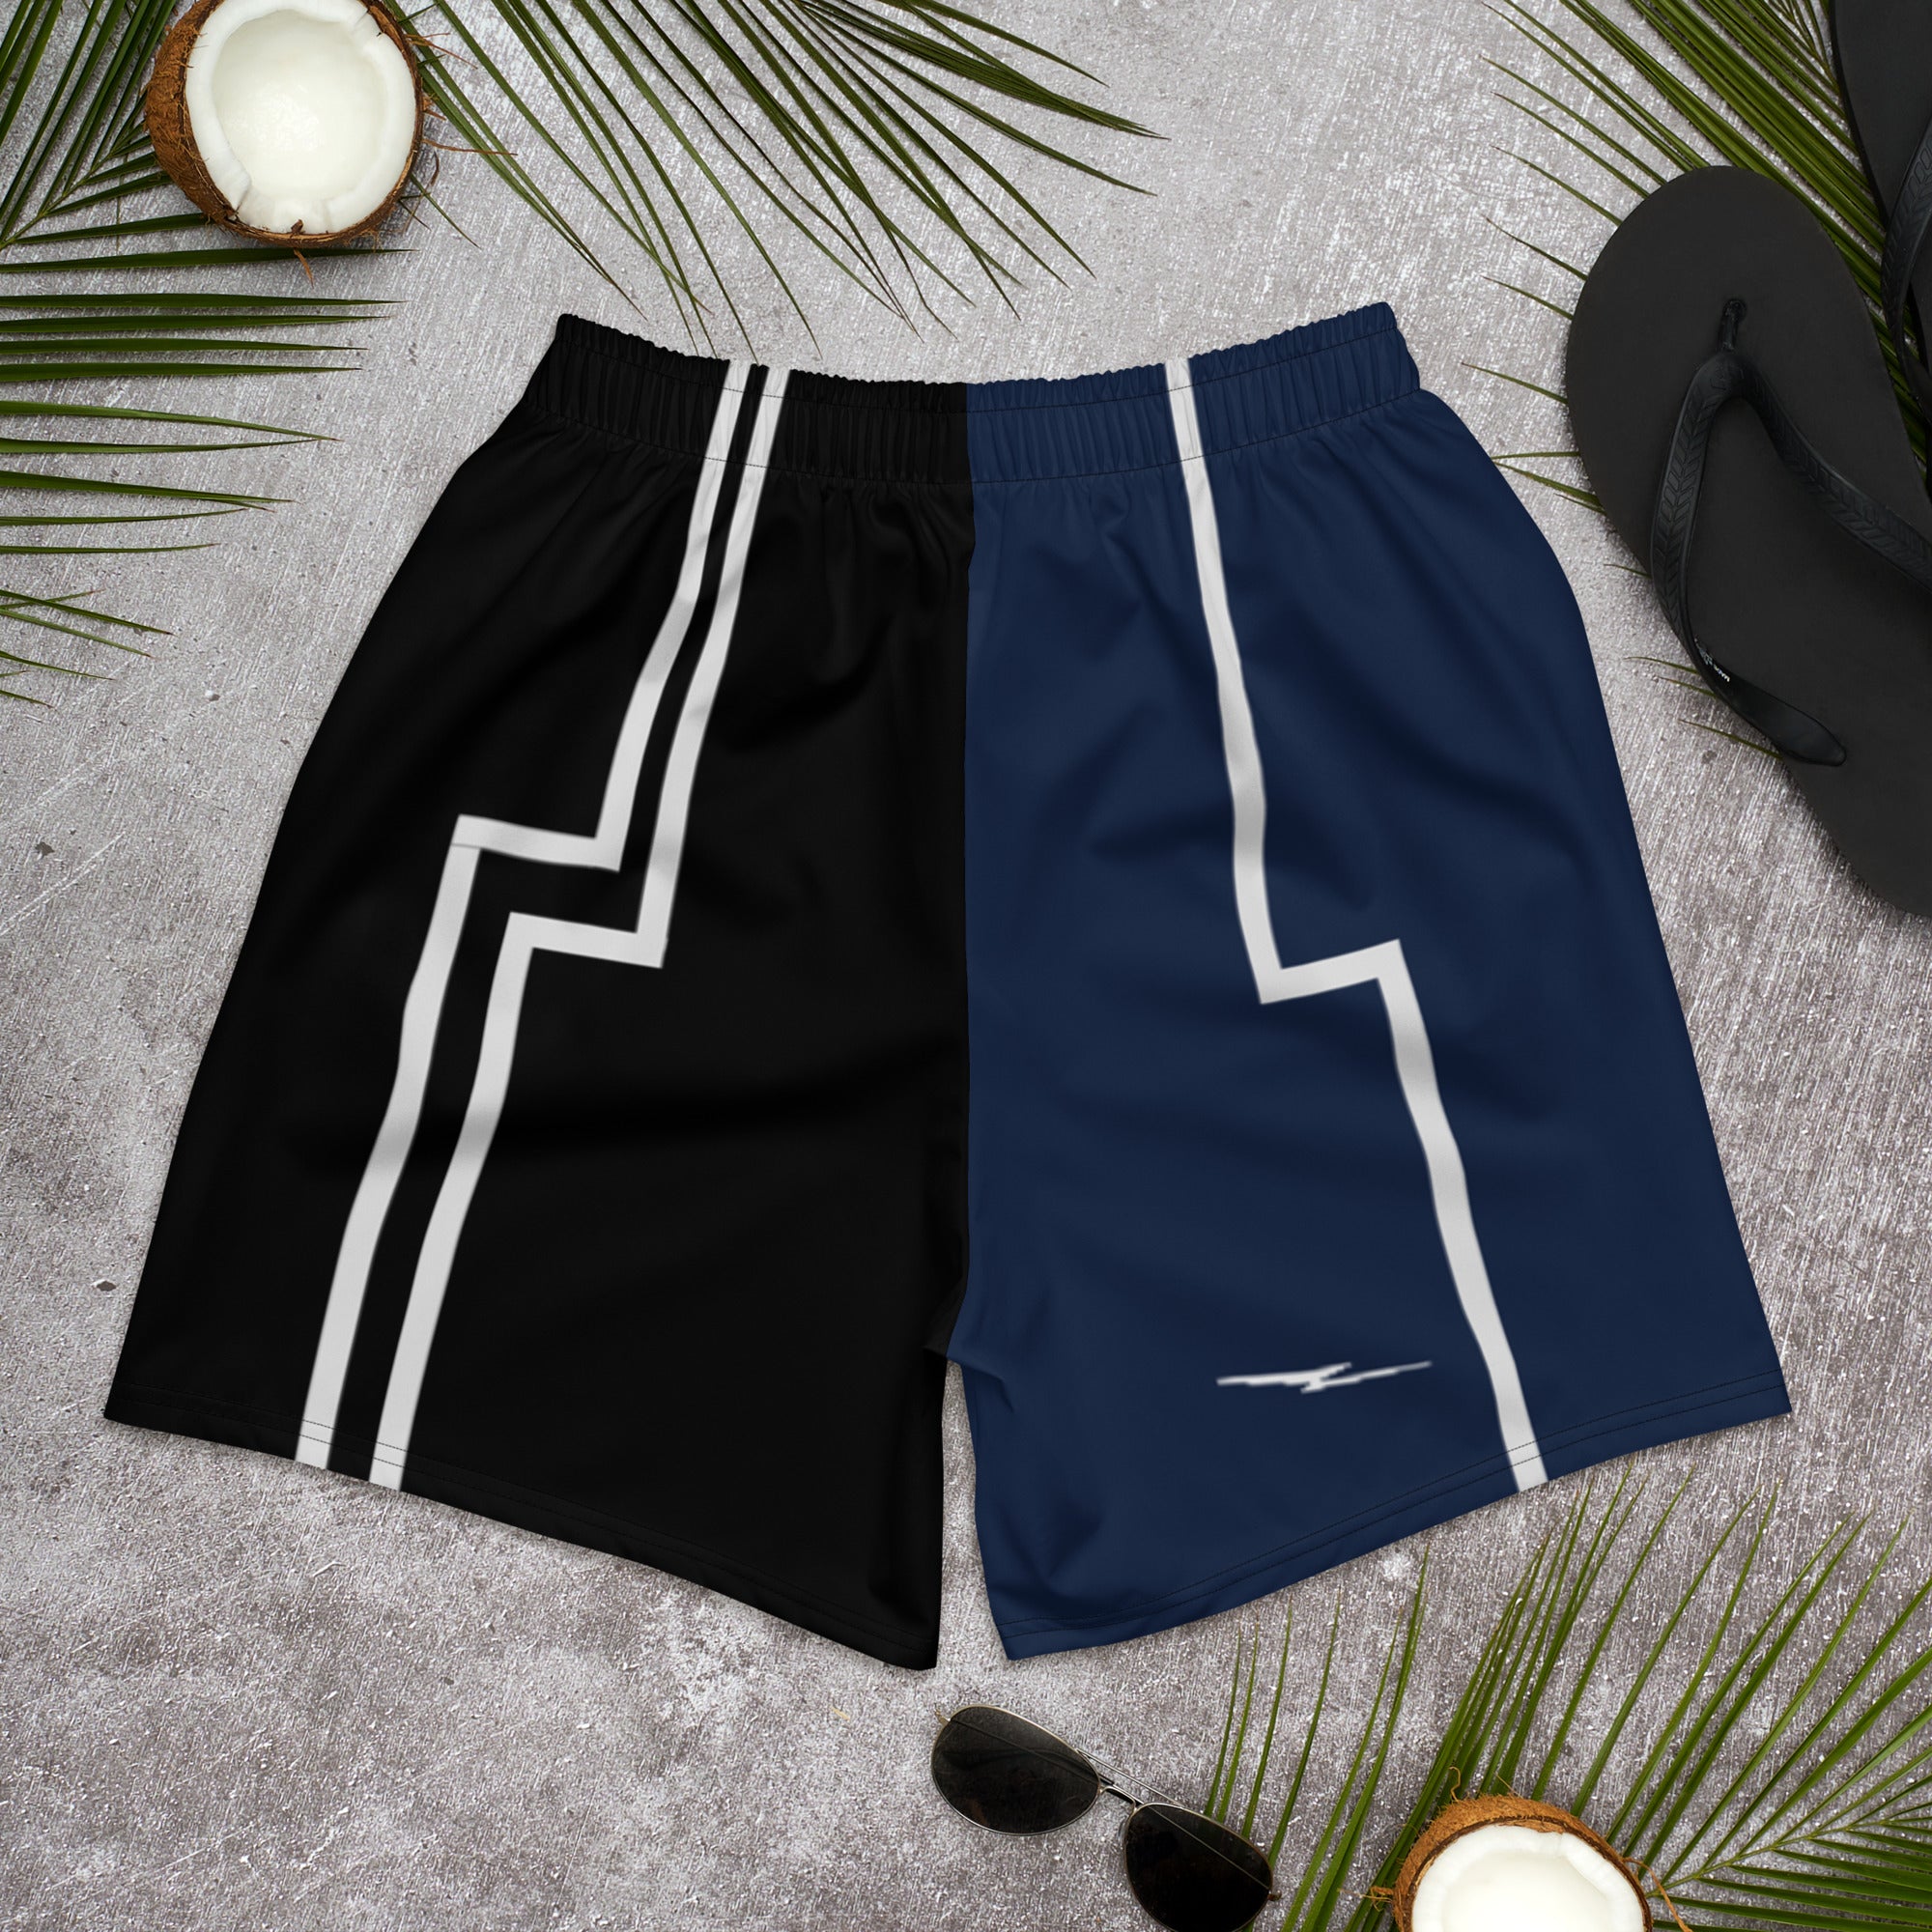 Scooter Men's Athletic Shorts